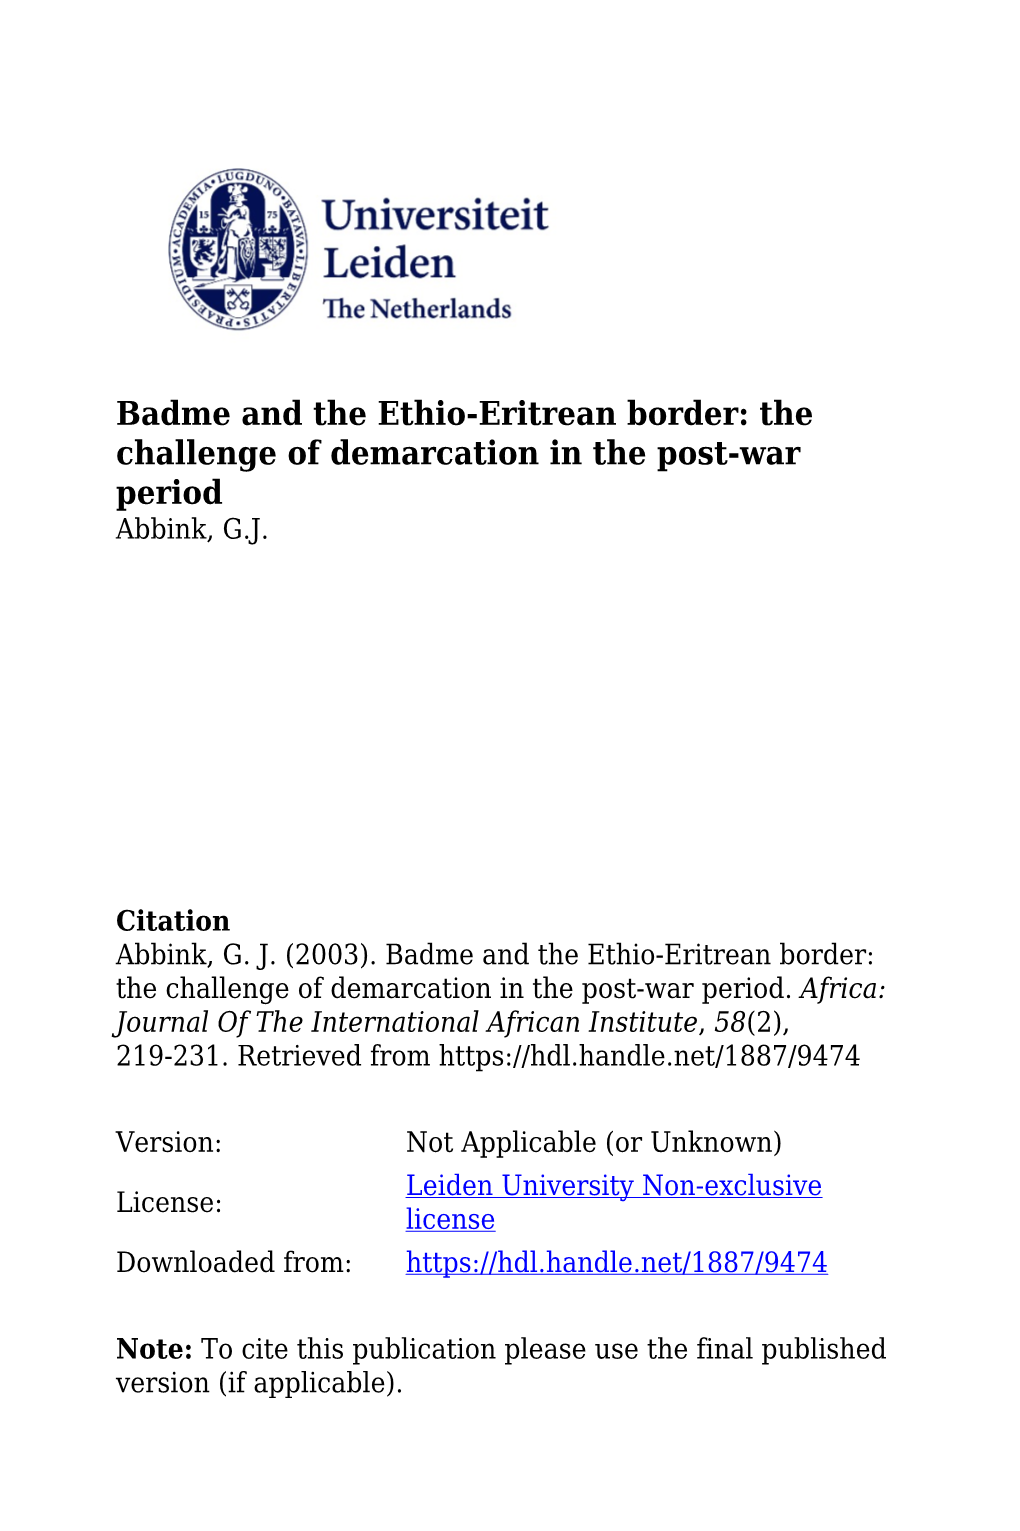 Badme and the Ethio-Eritrean Border: the Challenge of Demarcation in the Post-War Period Abbink, G.J